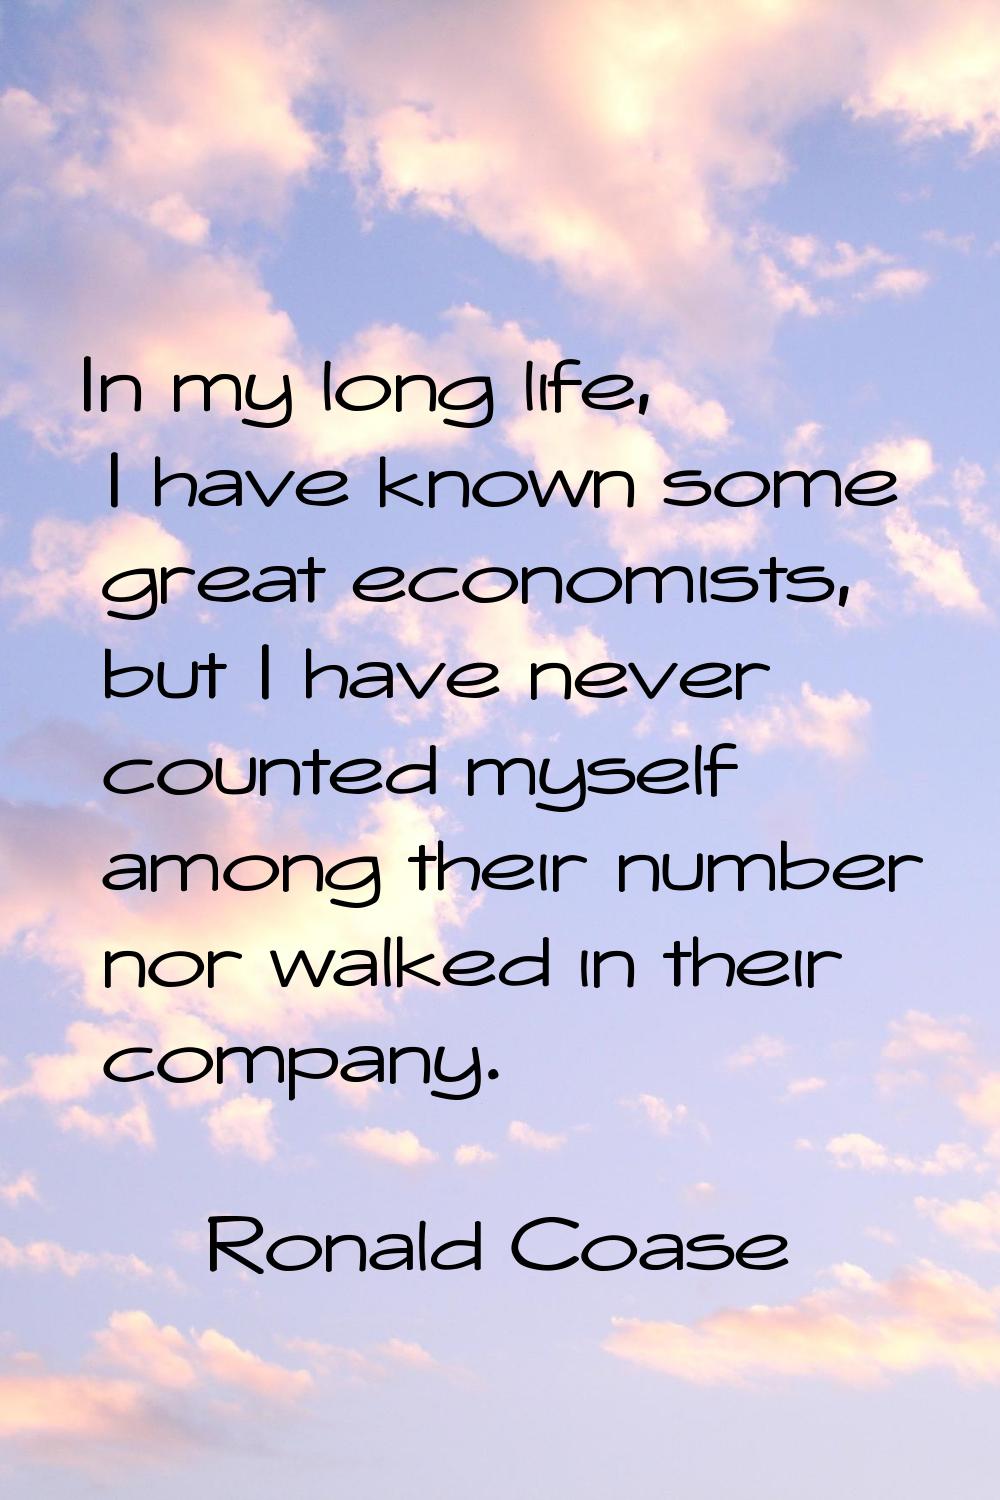 In my long life, I have known some great economists, but I have never counted myself among their nu